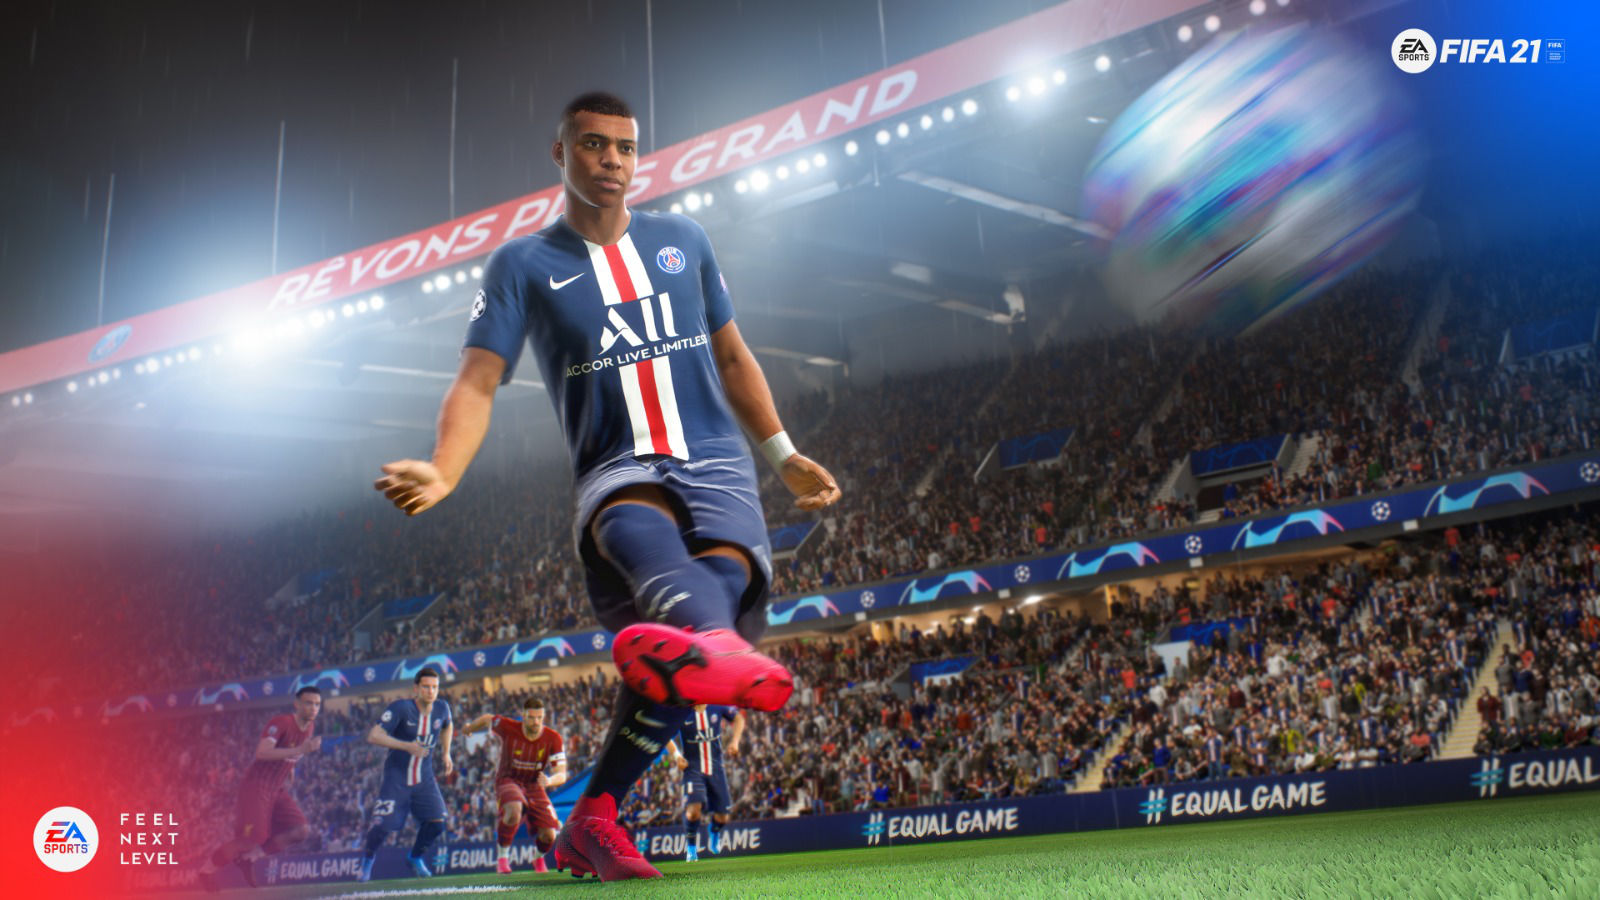 Report Mbappé Chosen Over Neymar to Appear on Cover of FIFA 21